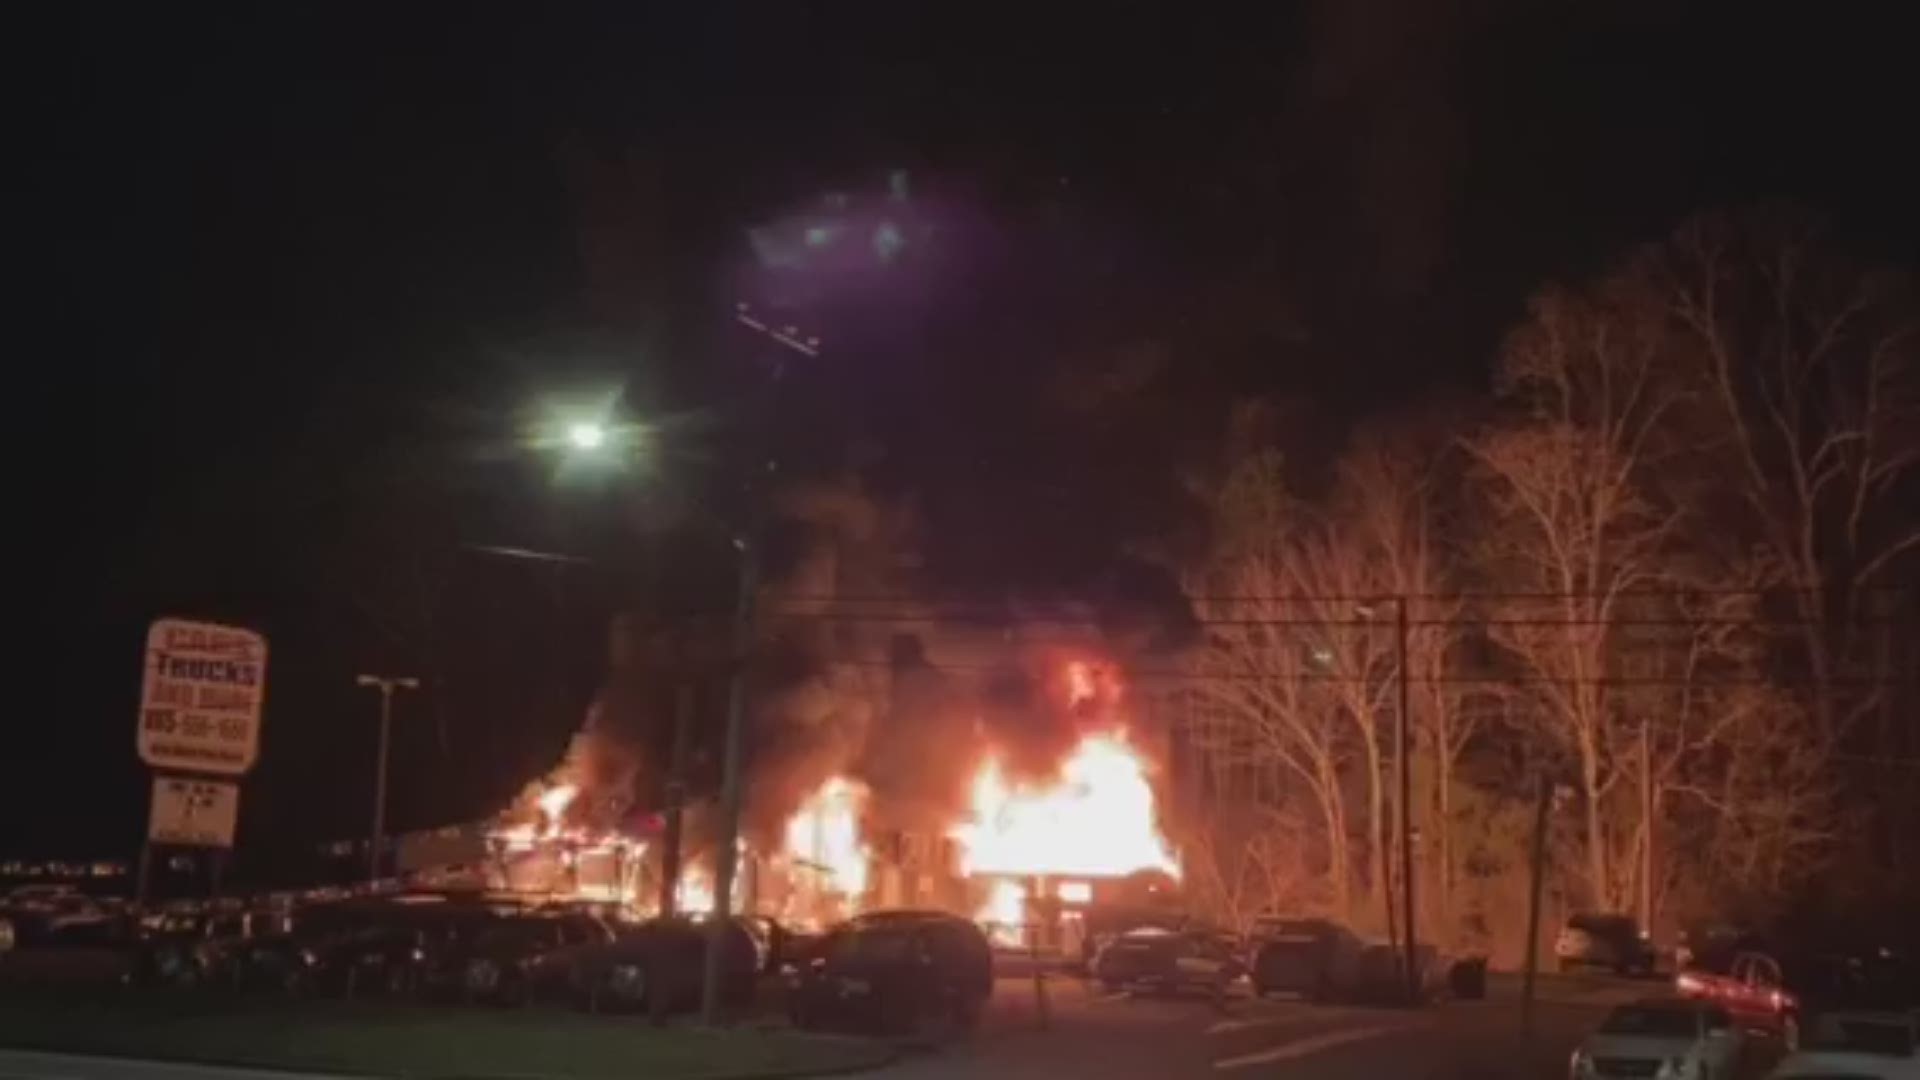 Knoxville Fire Department said there were no injuries after a structure fire at Cars, Trucks and More 12:30 a.m. Sunday.